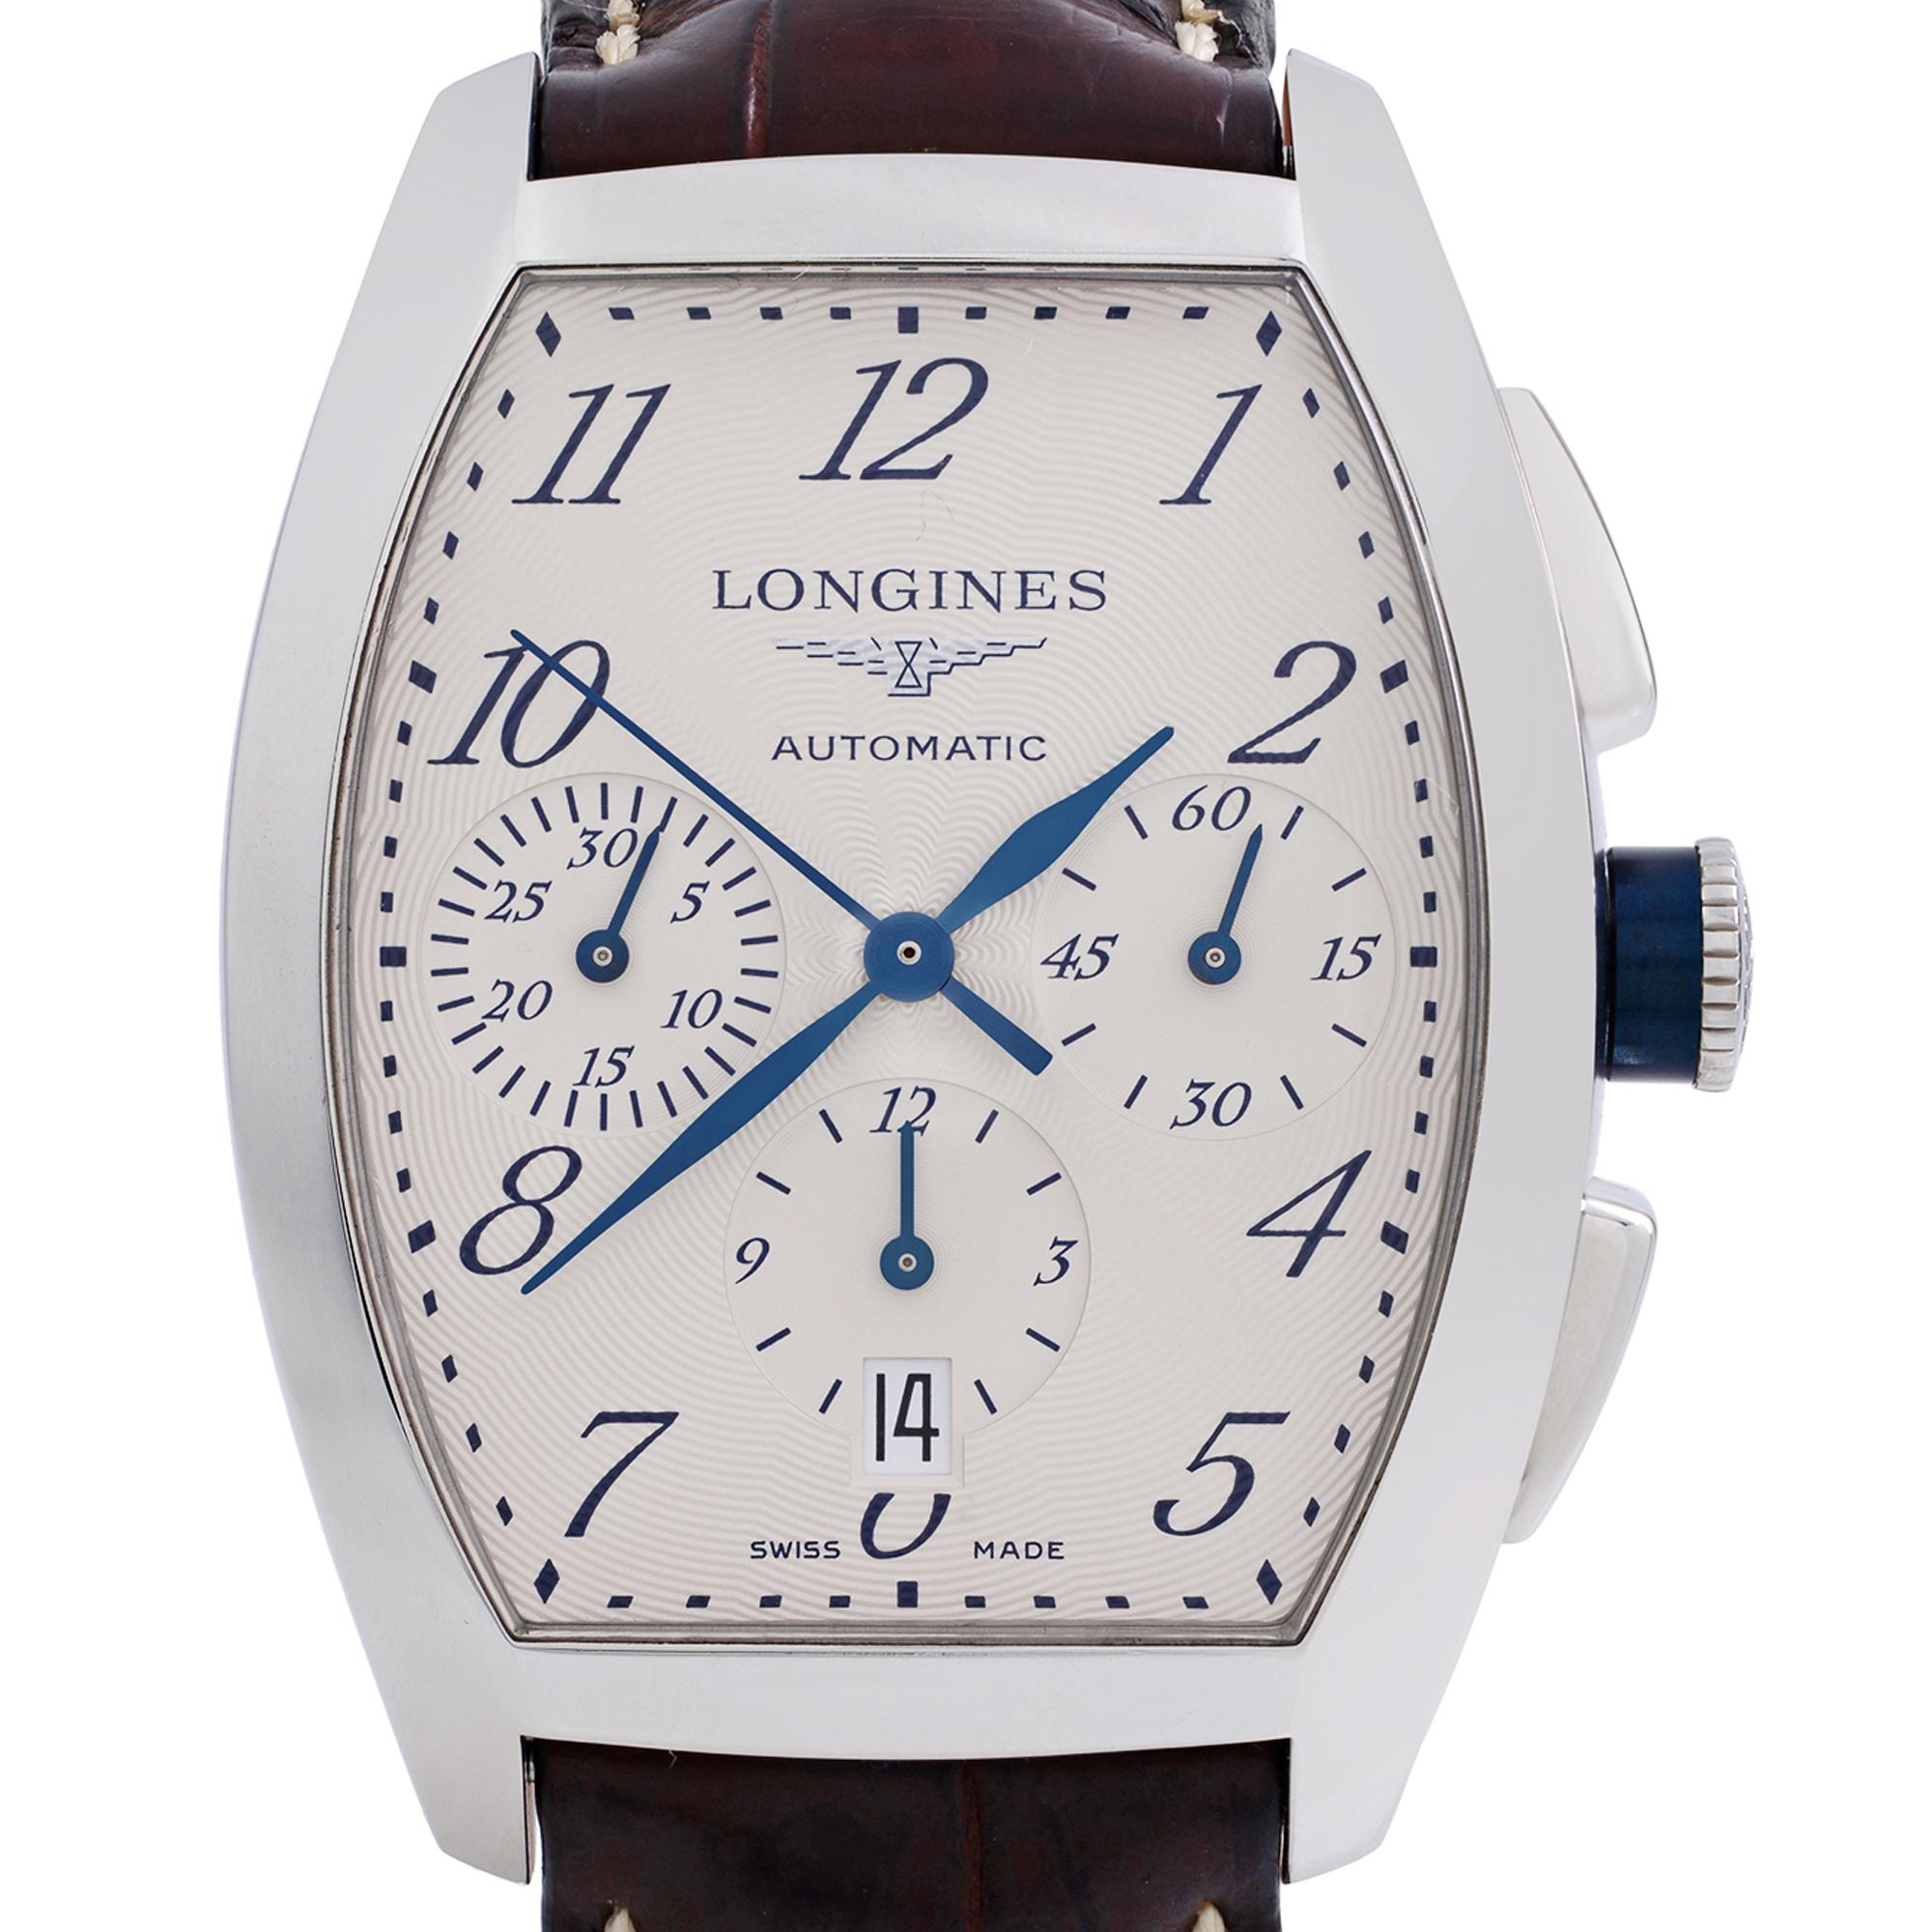 Pre-owned condition Longines Evidenza Steel Silver Guilloche Dial Automatic Men's Watch. Original box and papers are included. Covered by 1-year Chronostore Warranty. 
Details:
MSRP 3175
Brand Longines
Color Silver
Department Men
Model Number